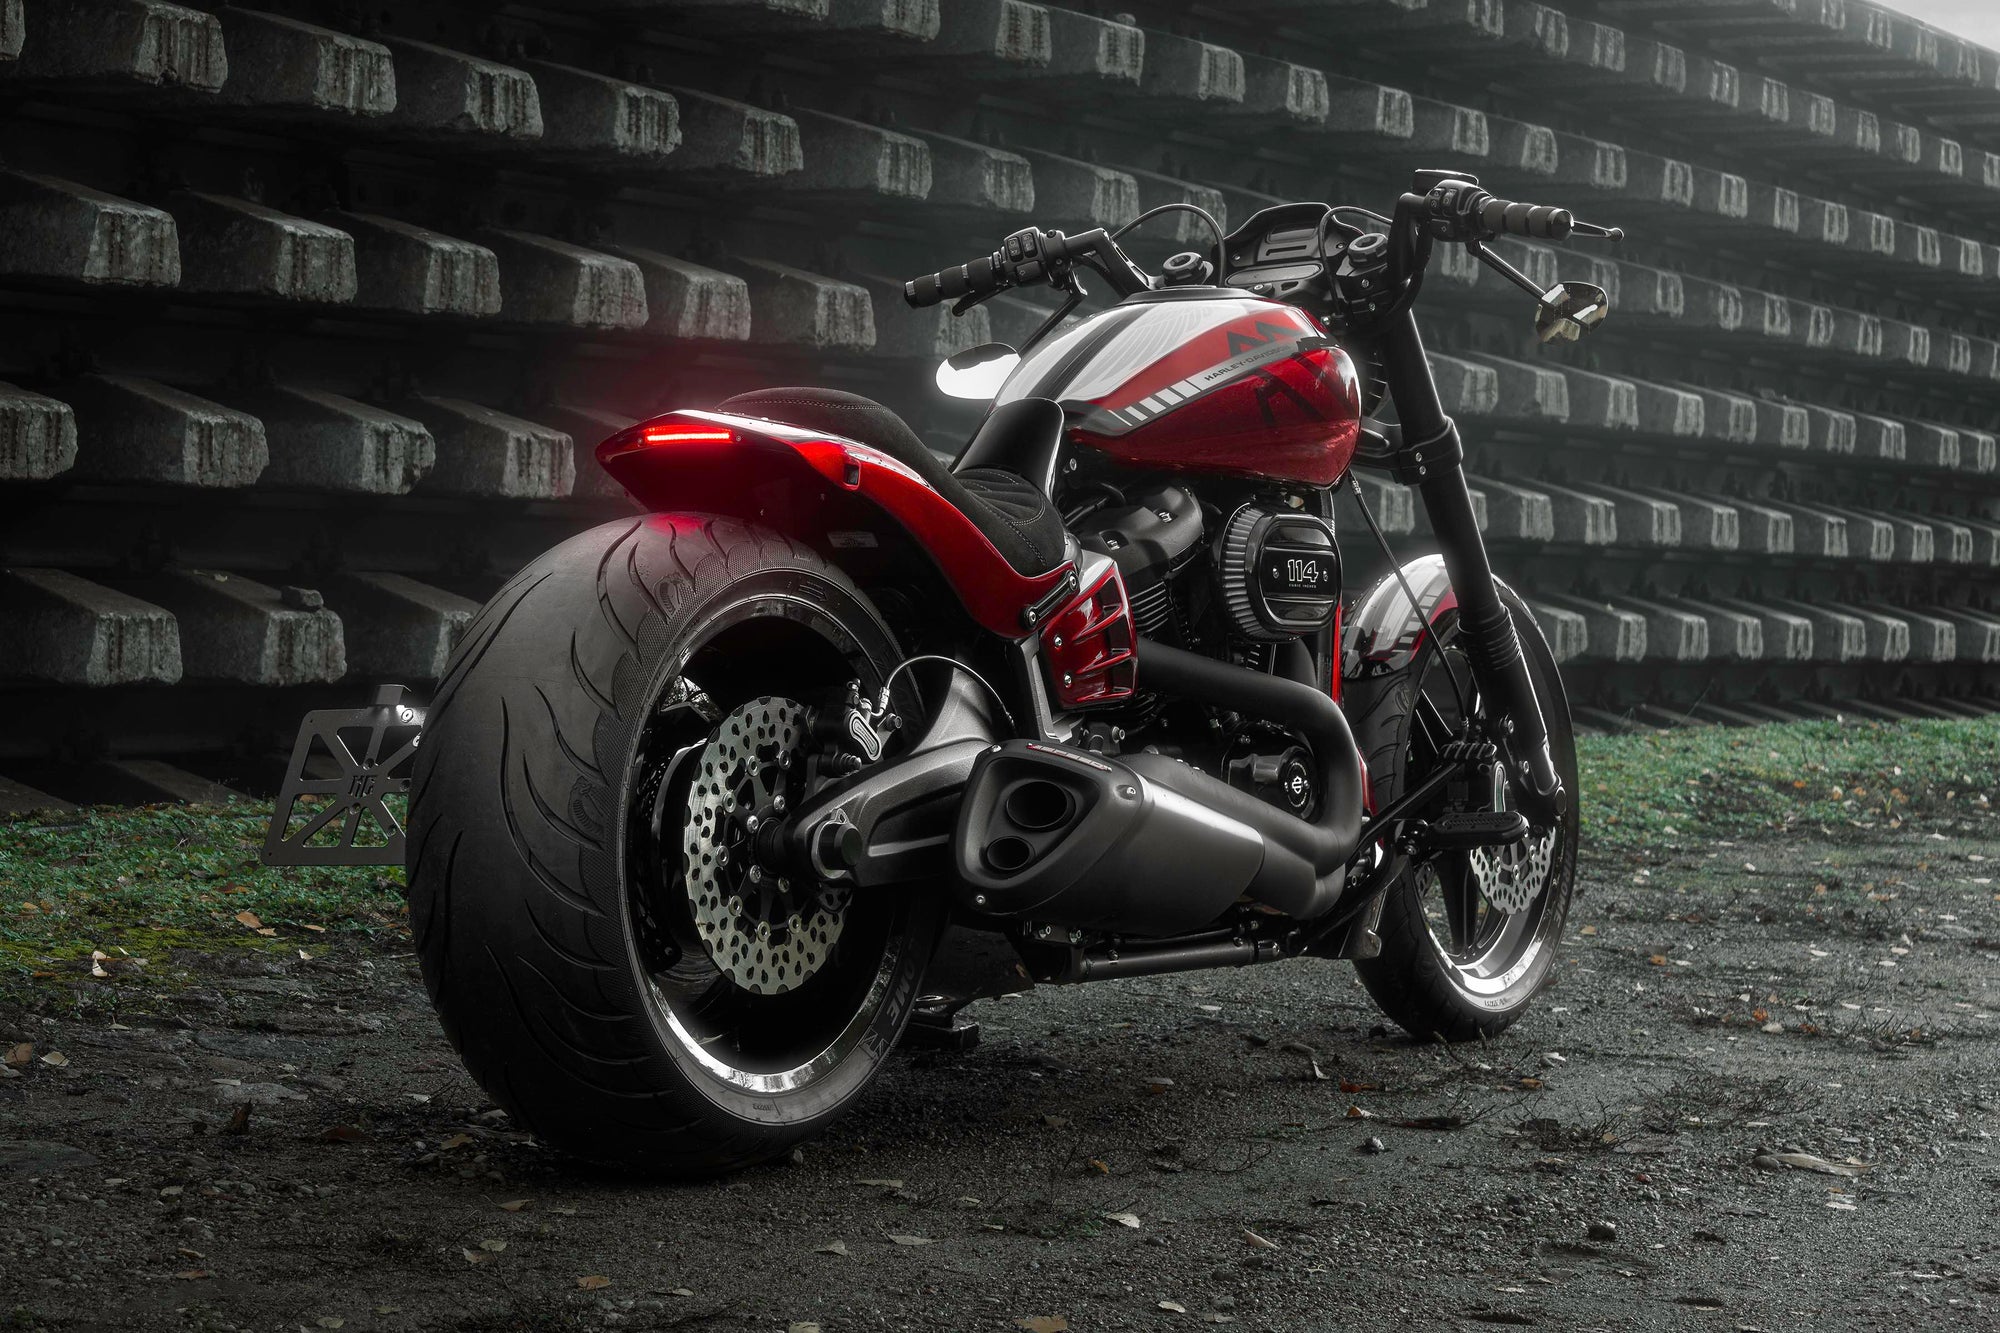 Harley Davidson motorcycle with Killer Custom parts from the rear outside on a gloomy day in an industrial environment